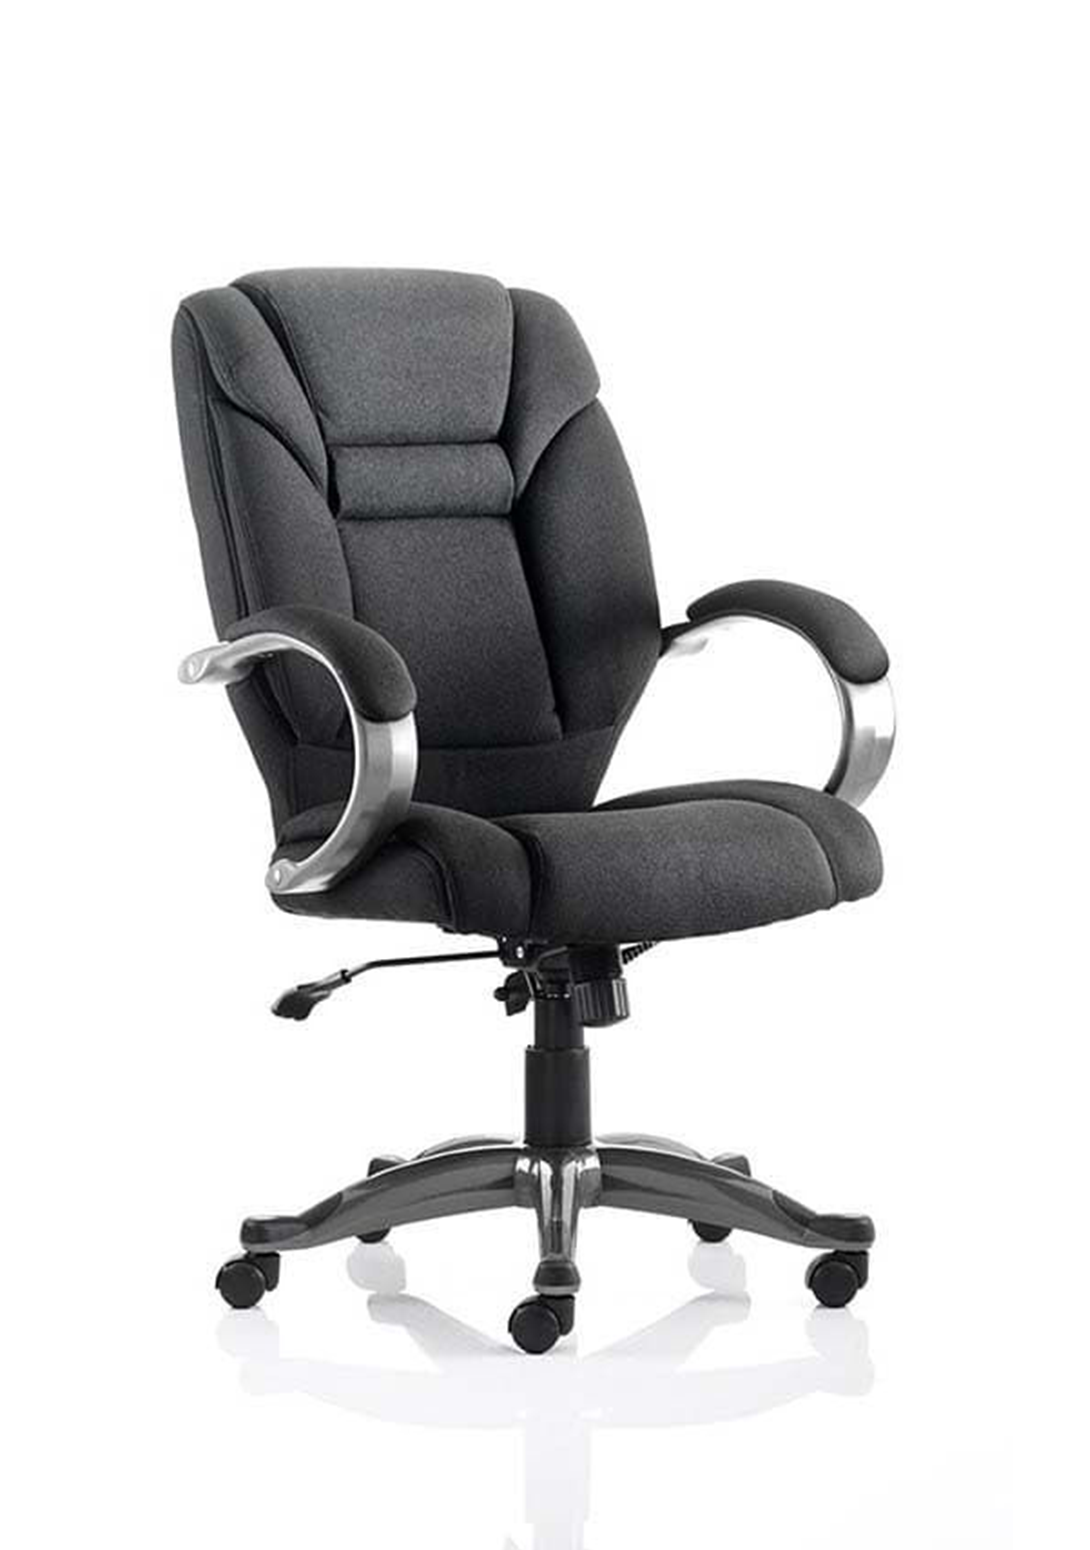 Galloway High Back Executive Office Chair with Arms